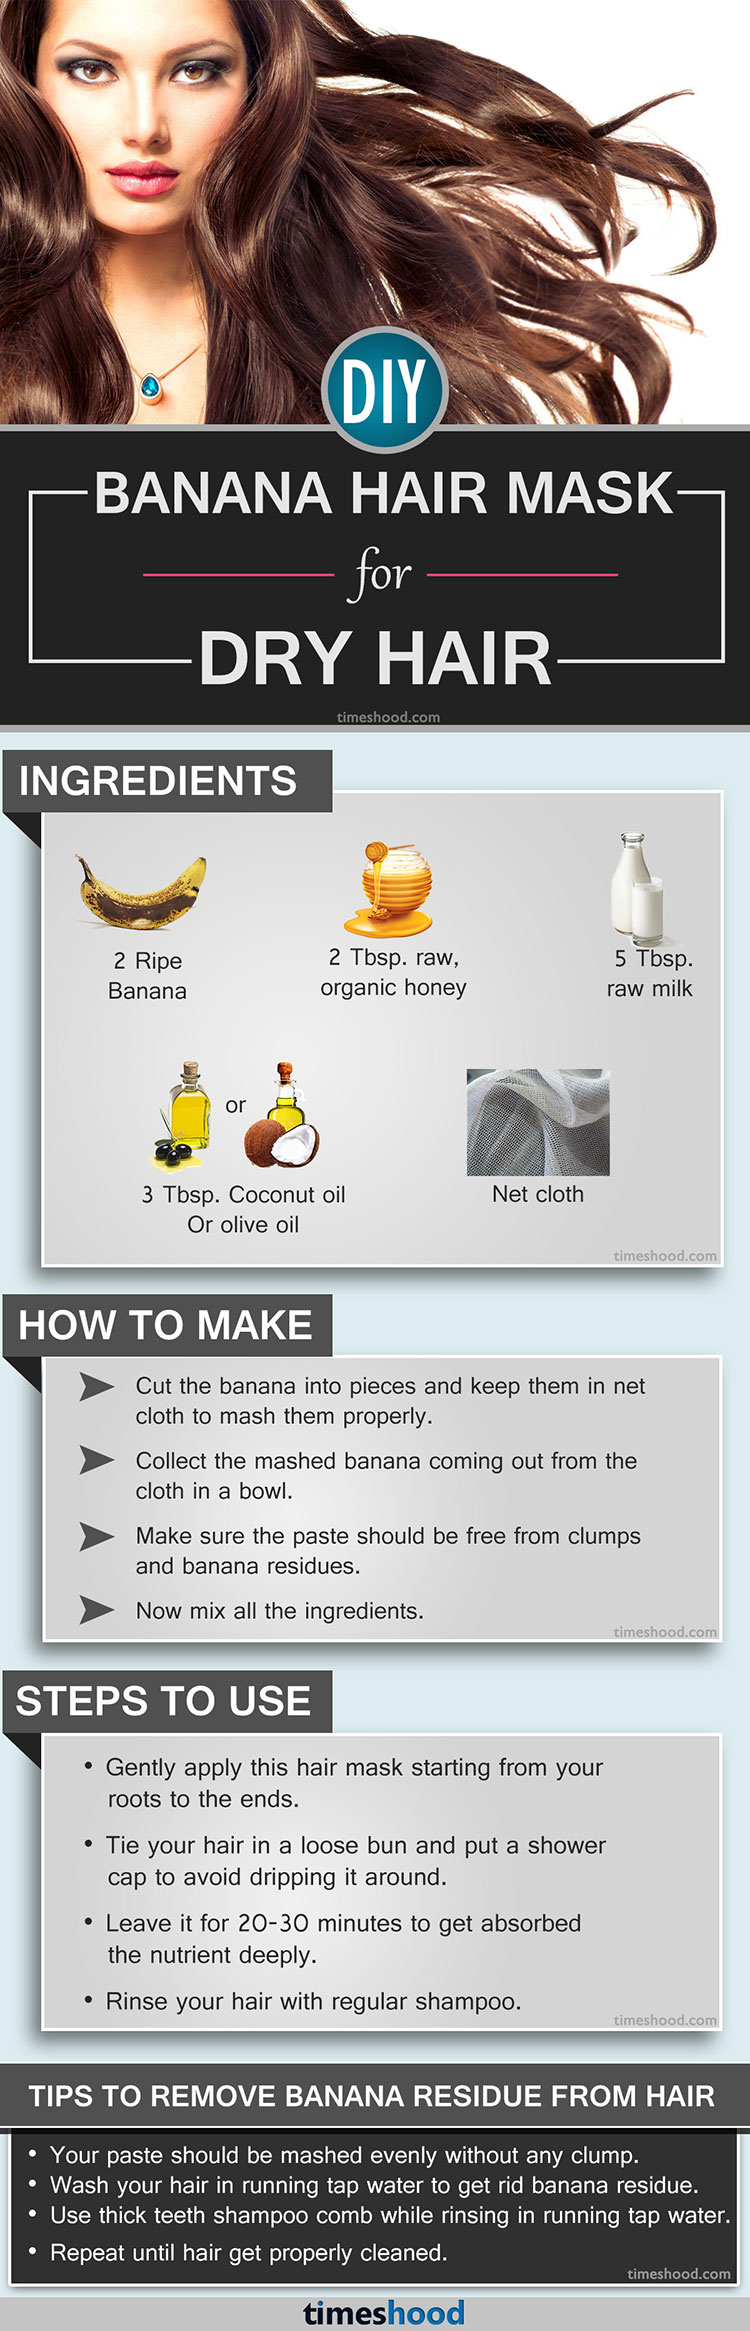 Banana hair mask for dry hair. Best DIY homemade hair mask for dry hair. From dry hair to soft and silky hair in one wash. How to make banana mask and step to use. Also tips to remove banana from hair.